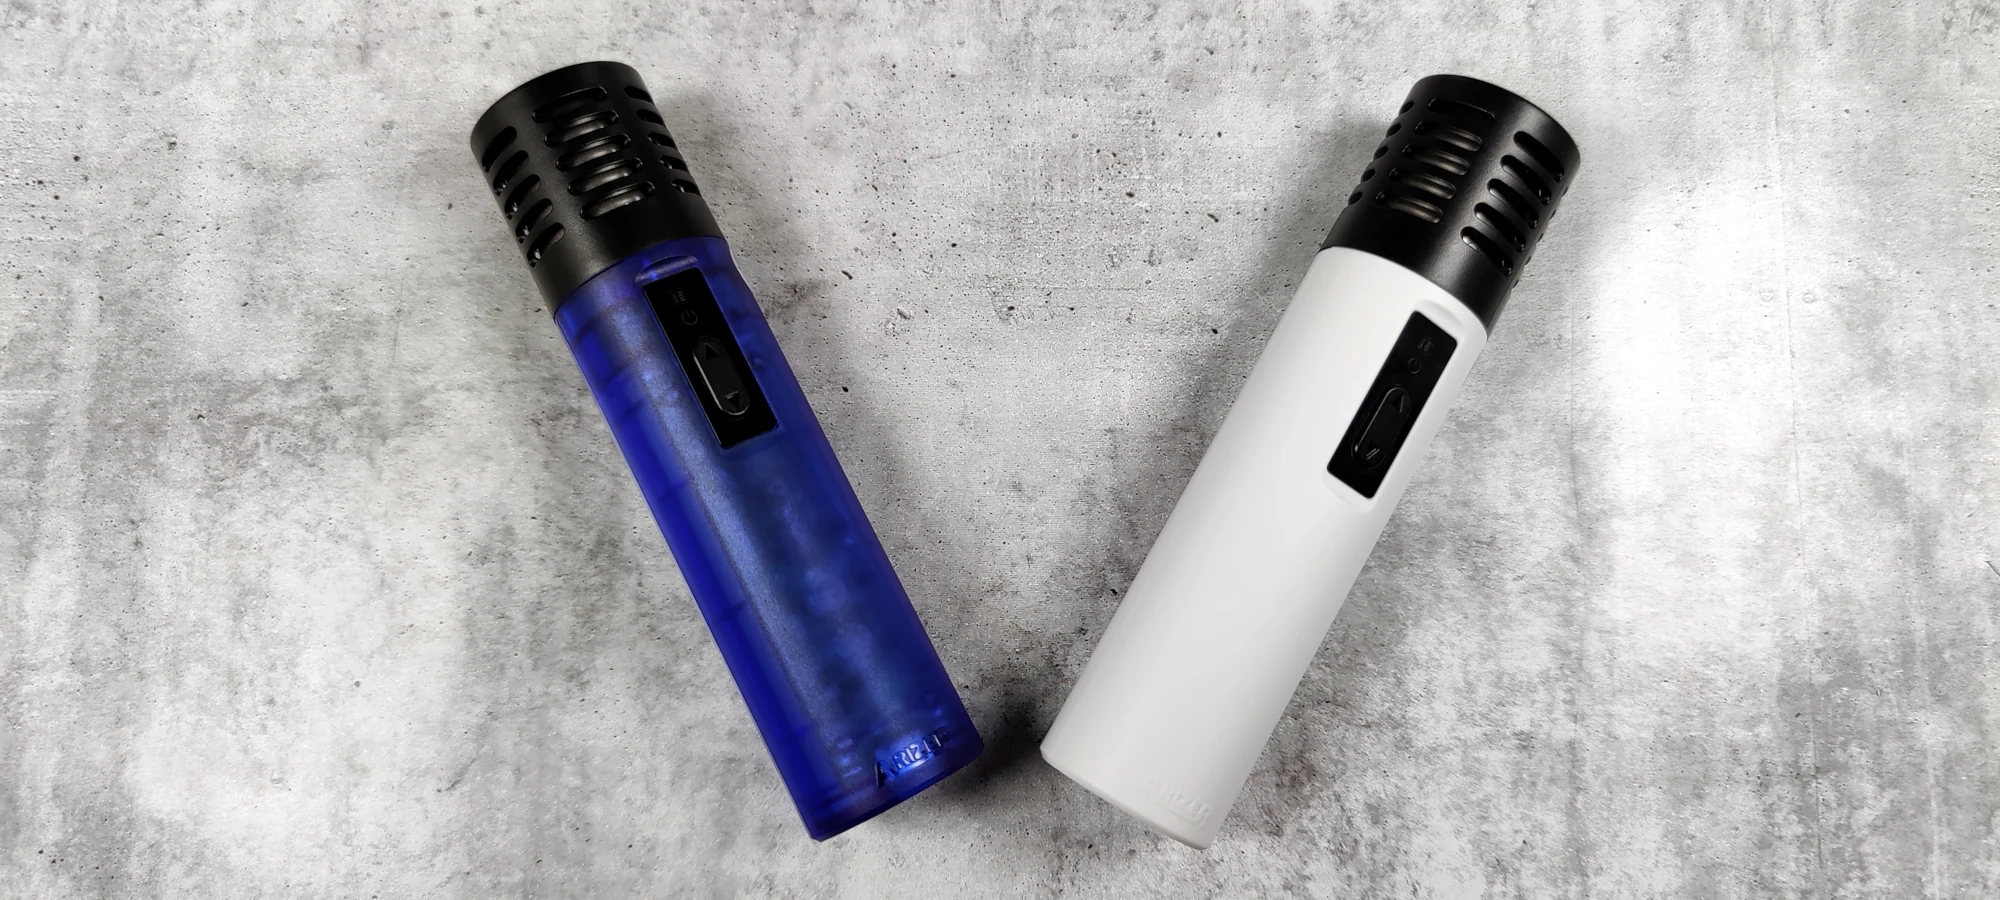 Arizer Air SE different color options (blue and white)